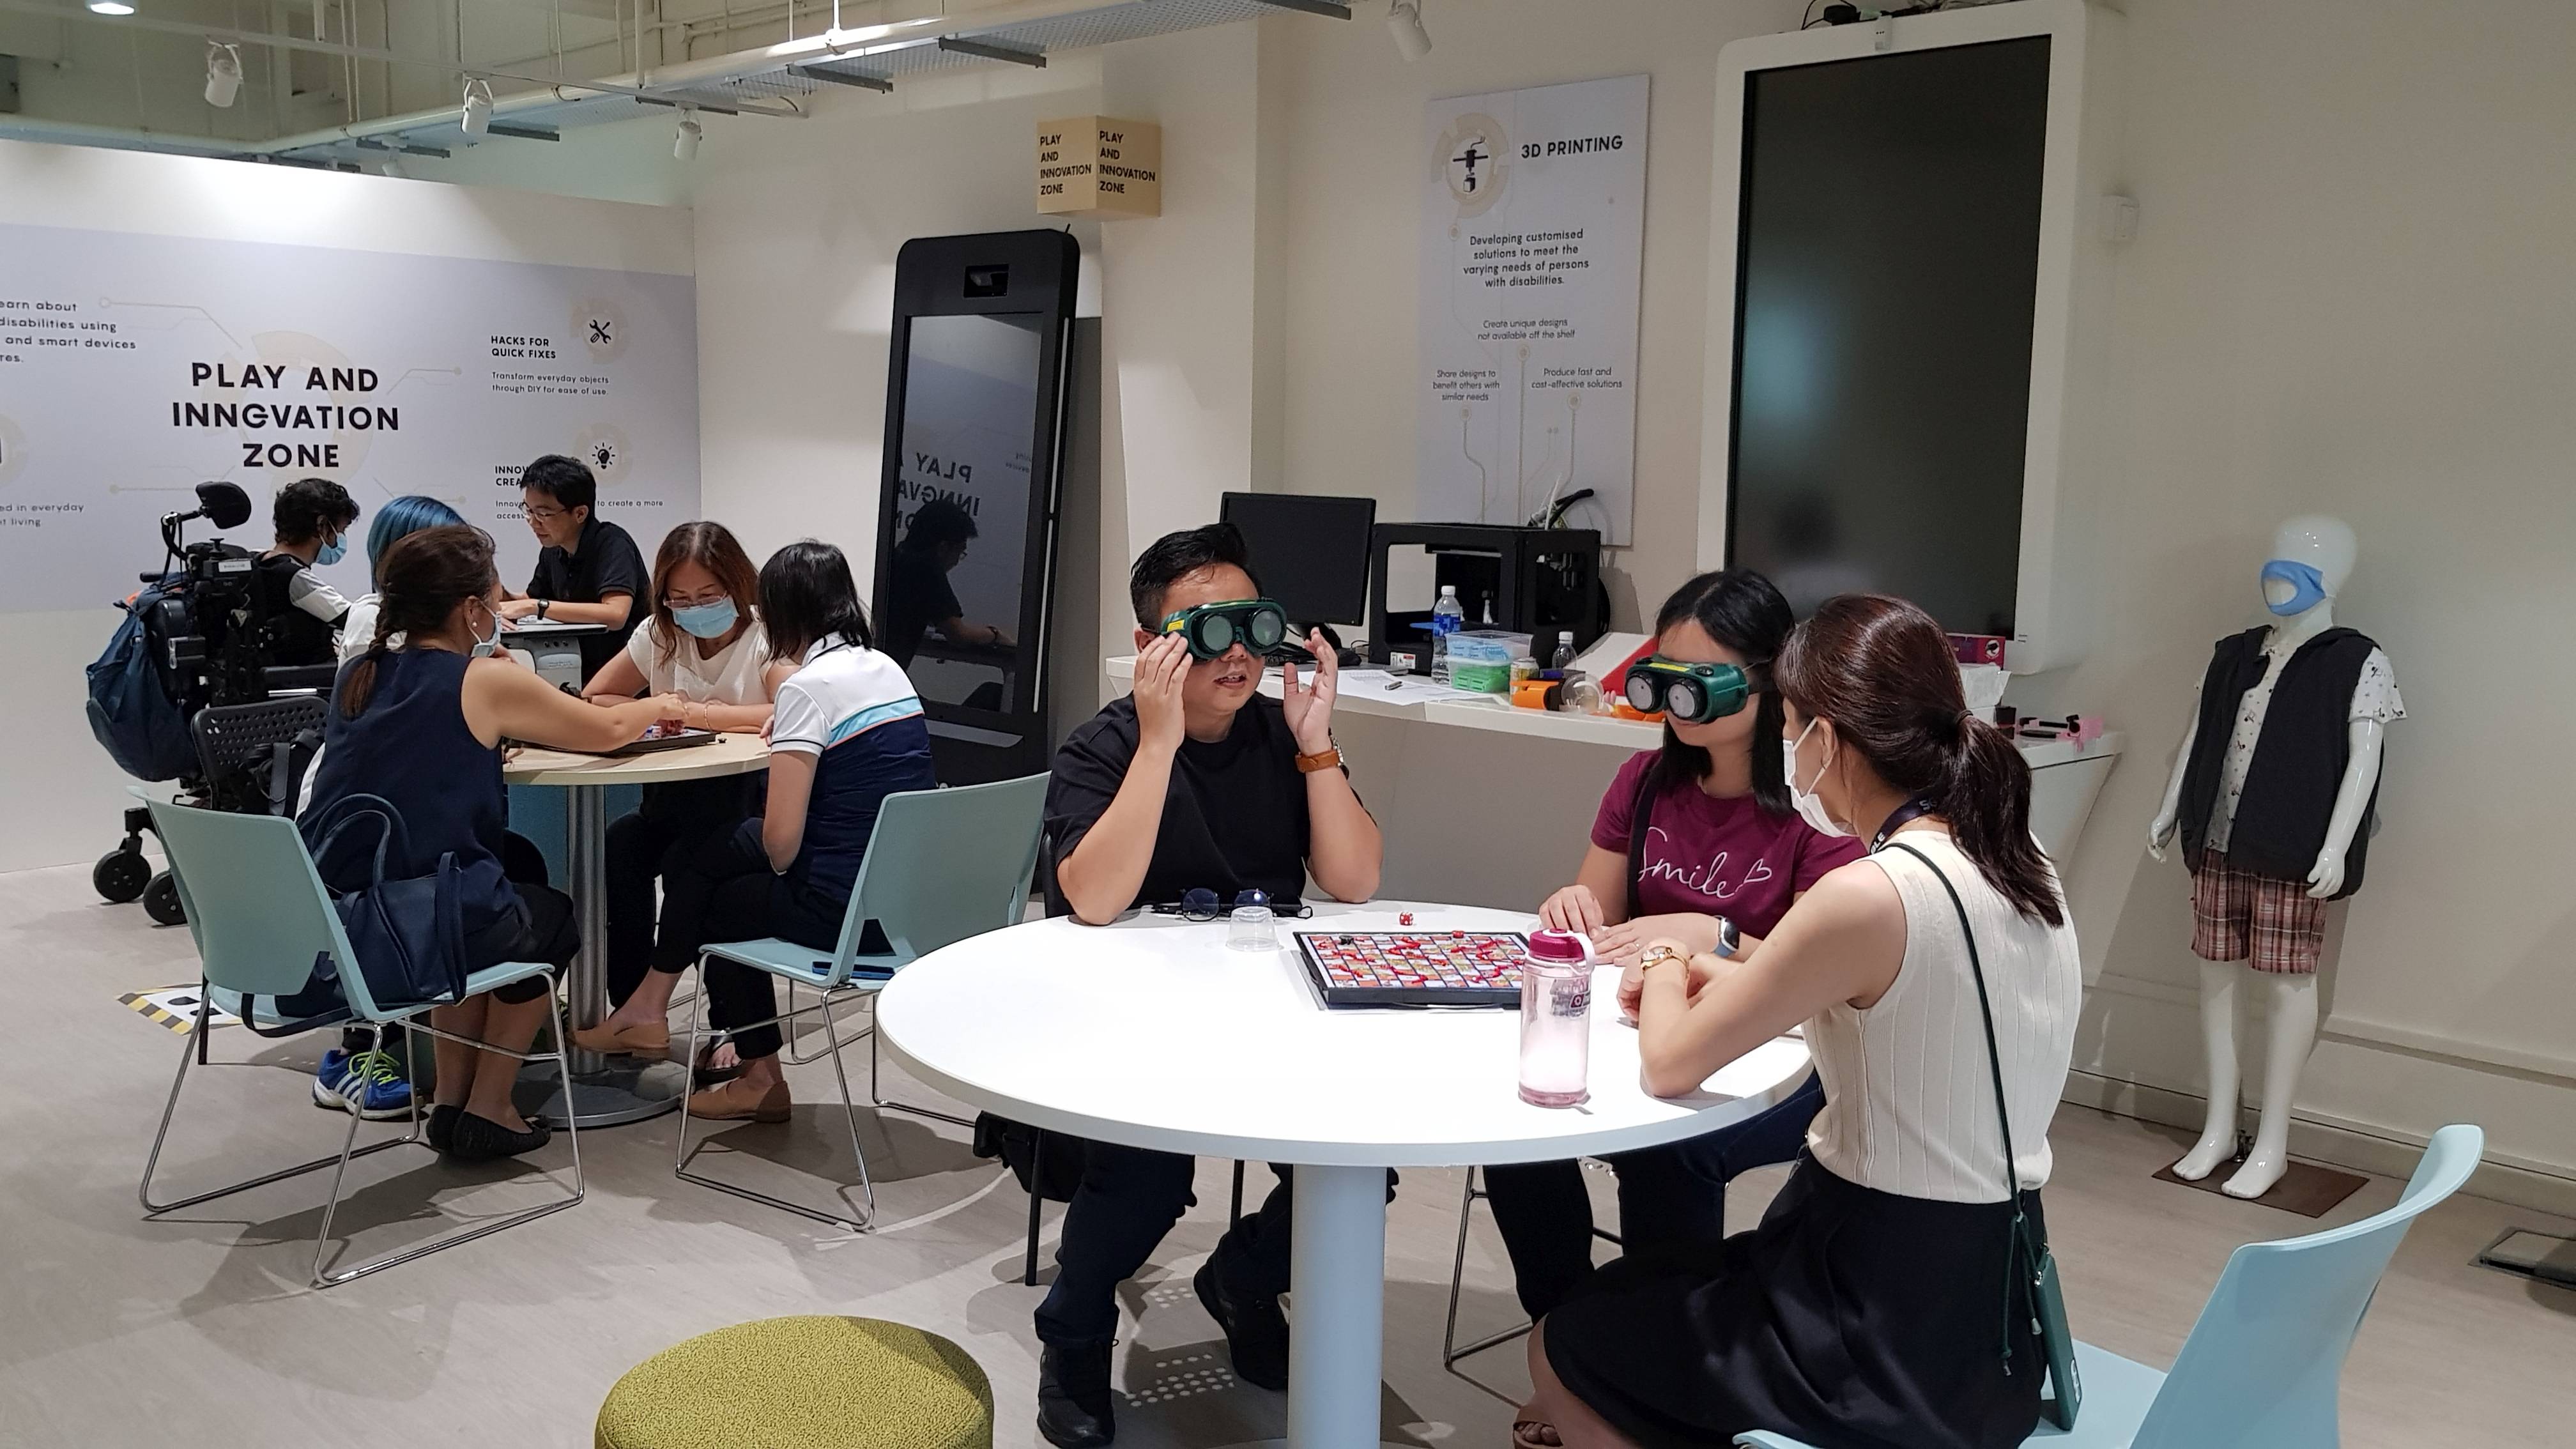 Participants using low vision simulation goggles to try out the modified board games.